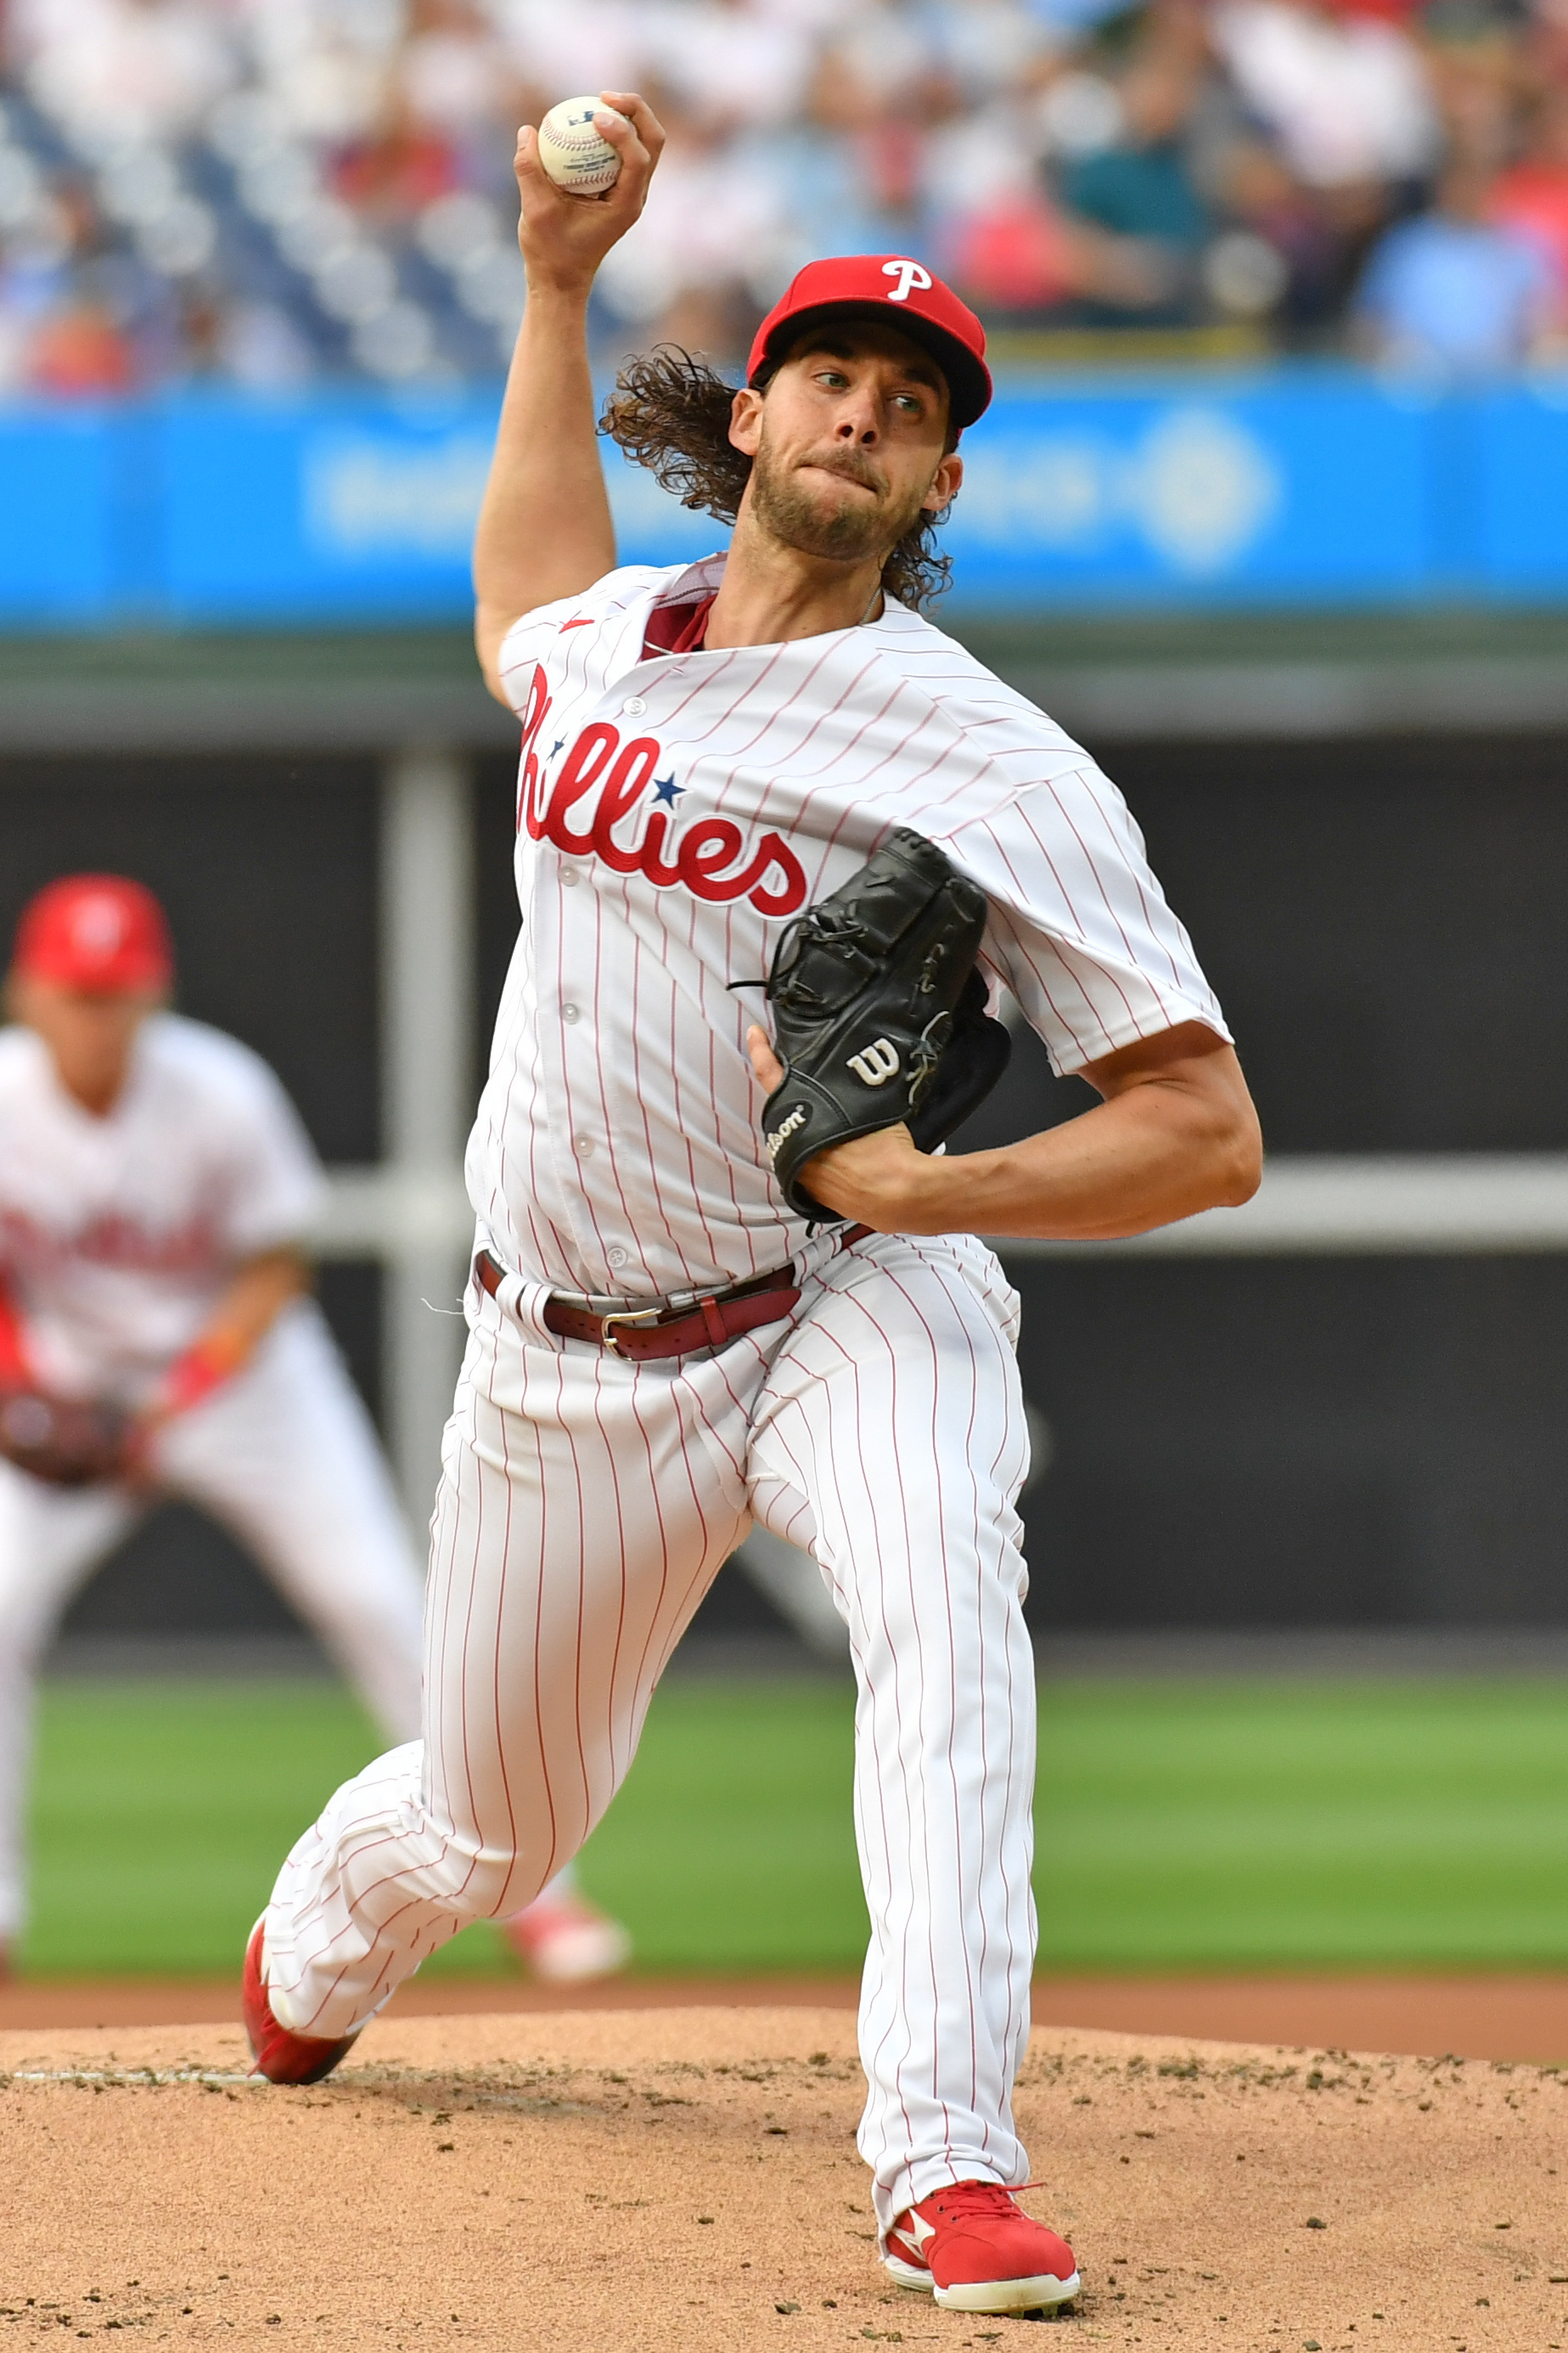 Nola takes no-hitter into 7th, Turner has 2 HRs as Phillies beat Tigers 8-3  - The San Diego Union-Tribune